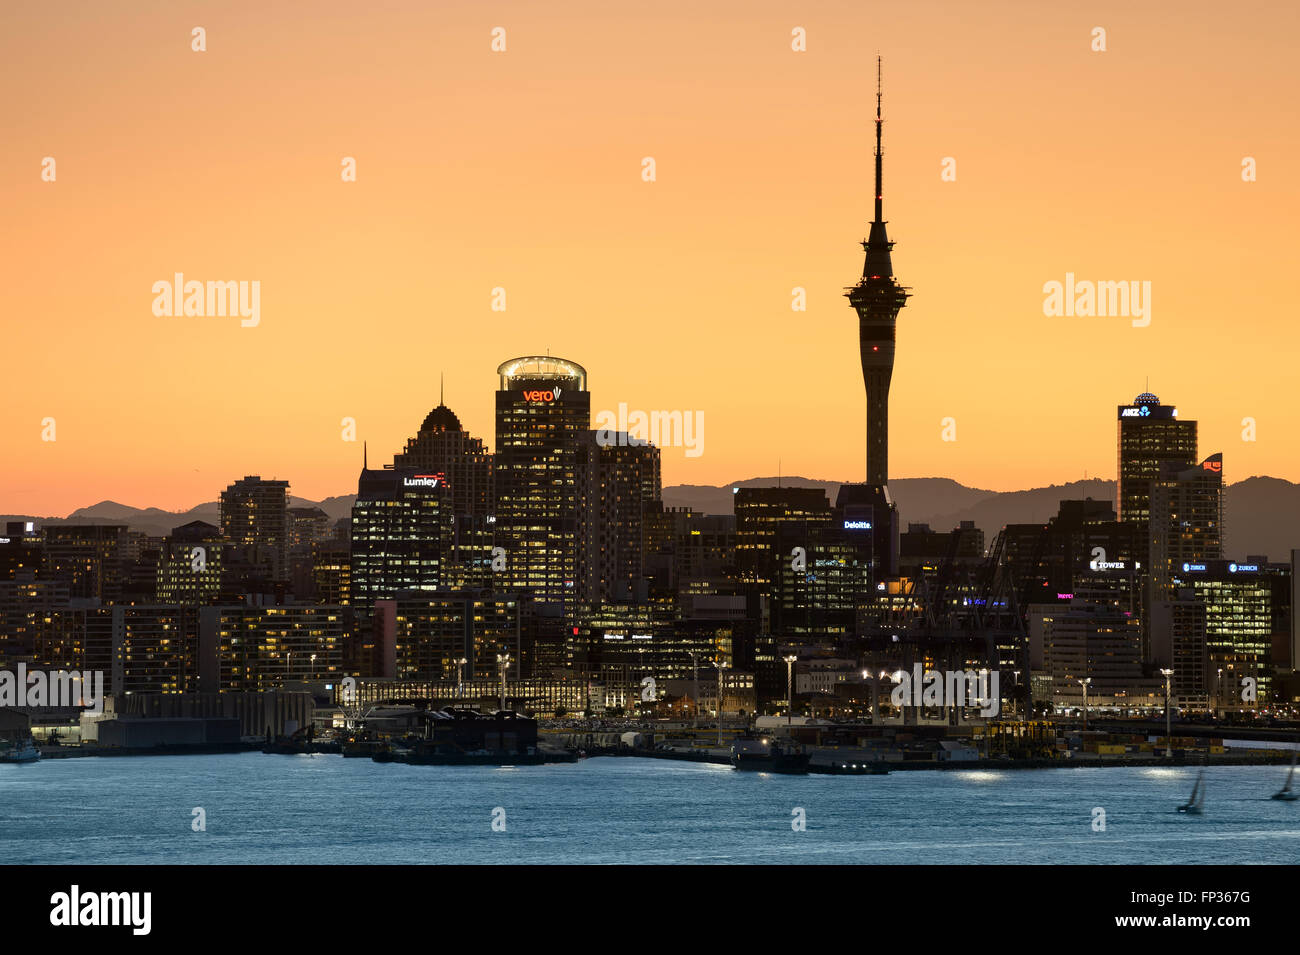 New Zealand North Island Auckland Central Business District (ou CBD) Louis  Vuitton store on Queen street Stock Photo - Alamy